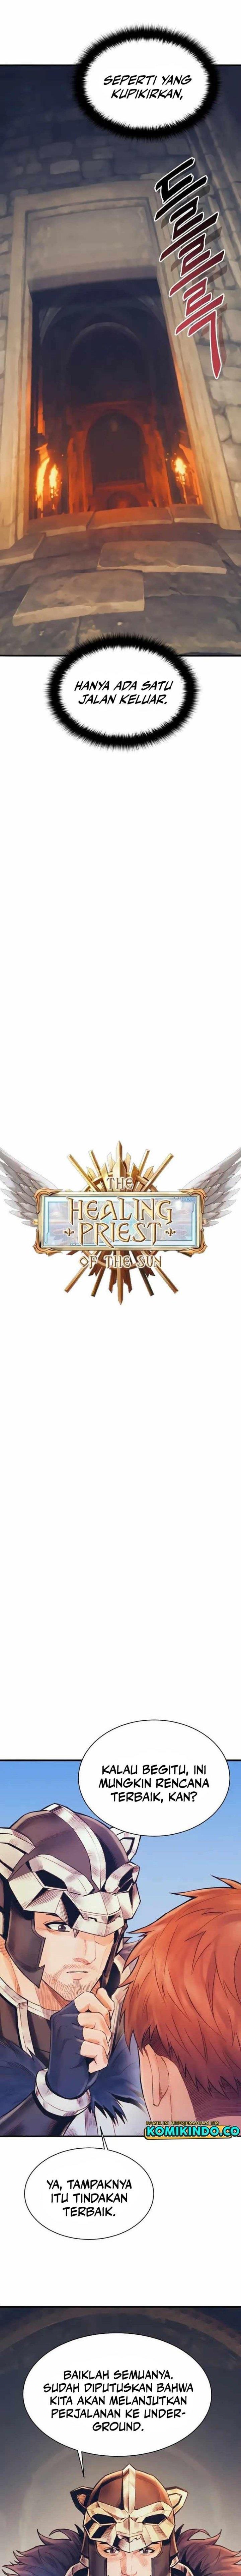 The Healing Priest Of The Sun Chapter 61